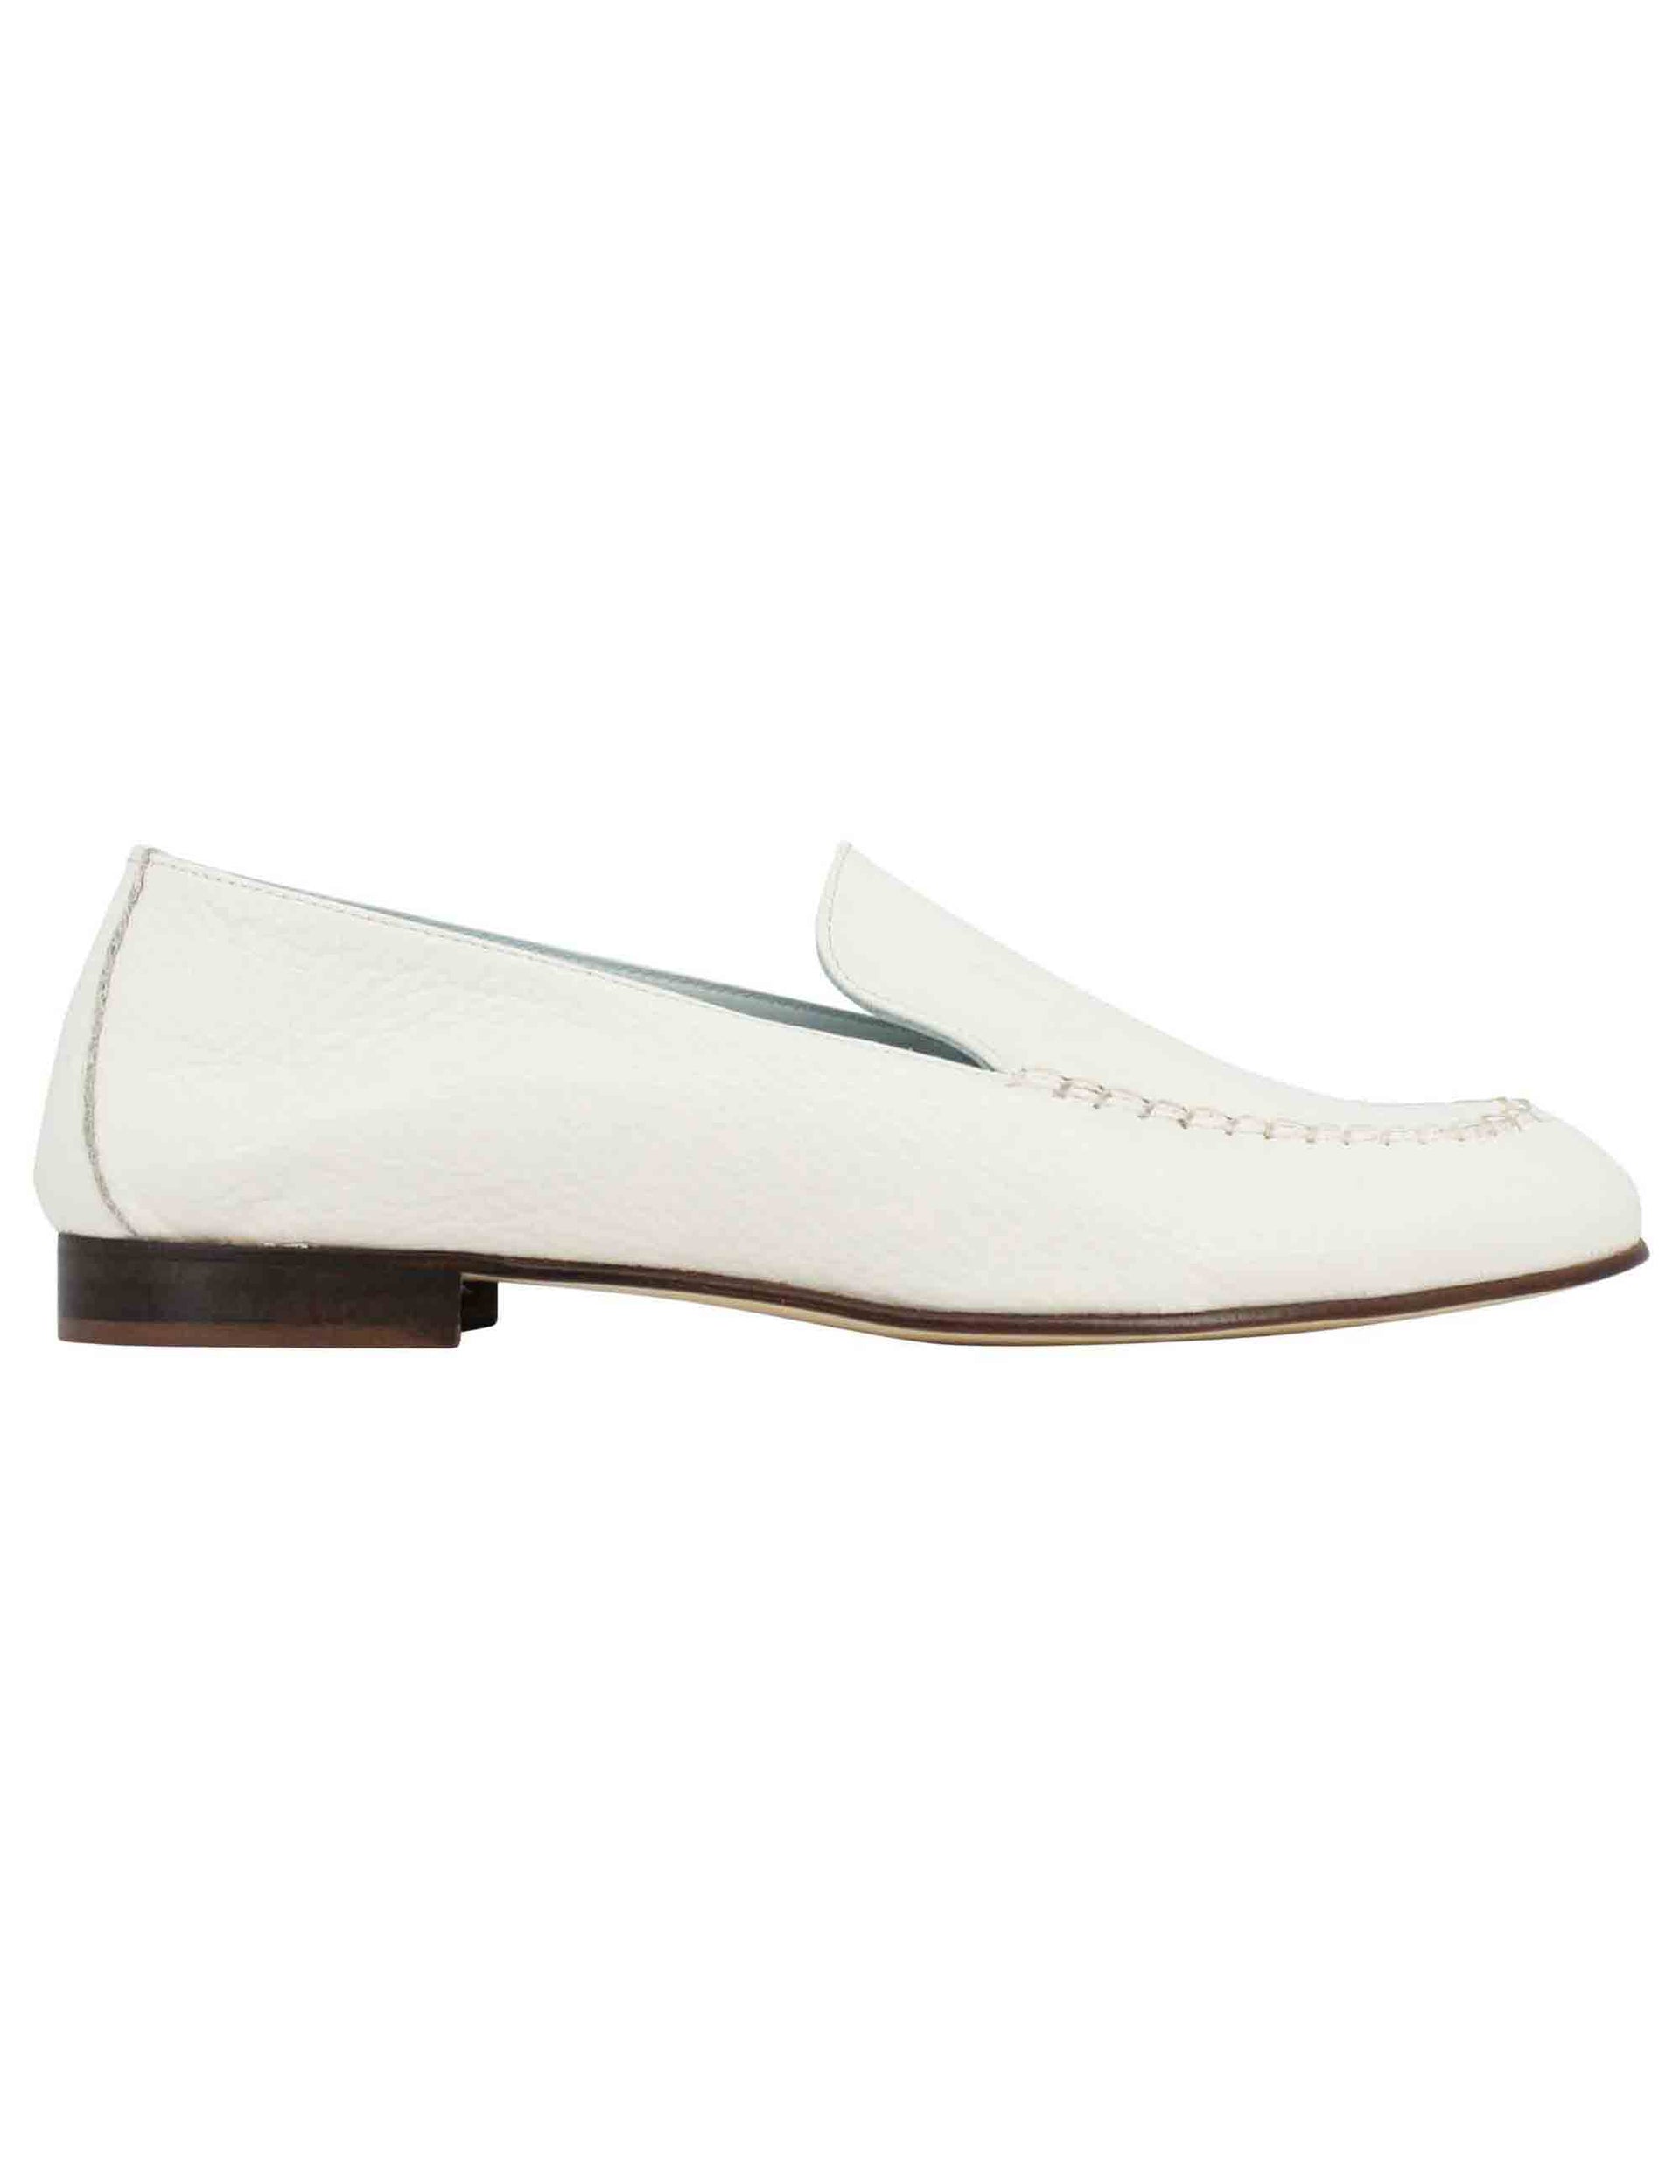 Women's white leather moccasins with leather sole